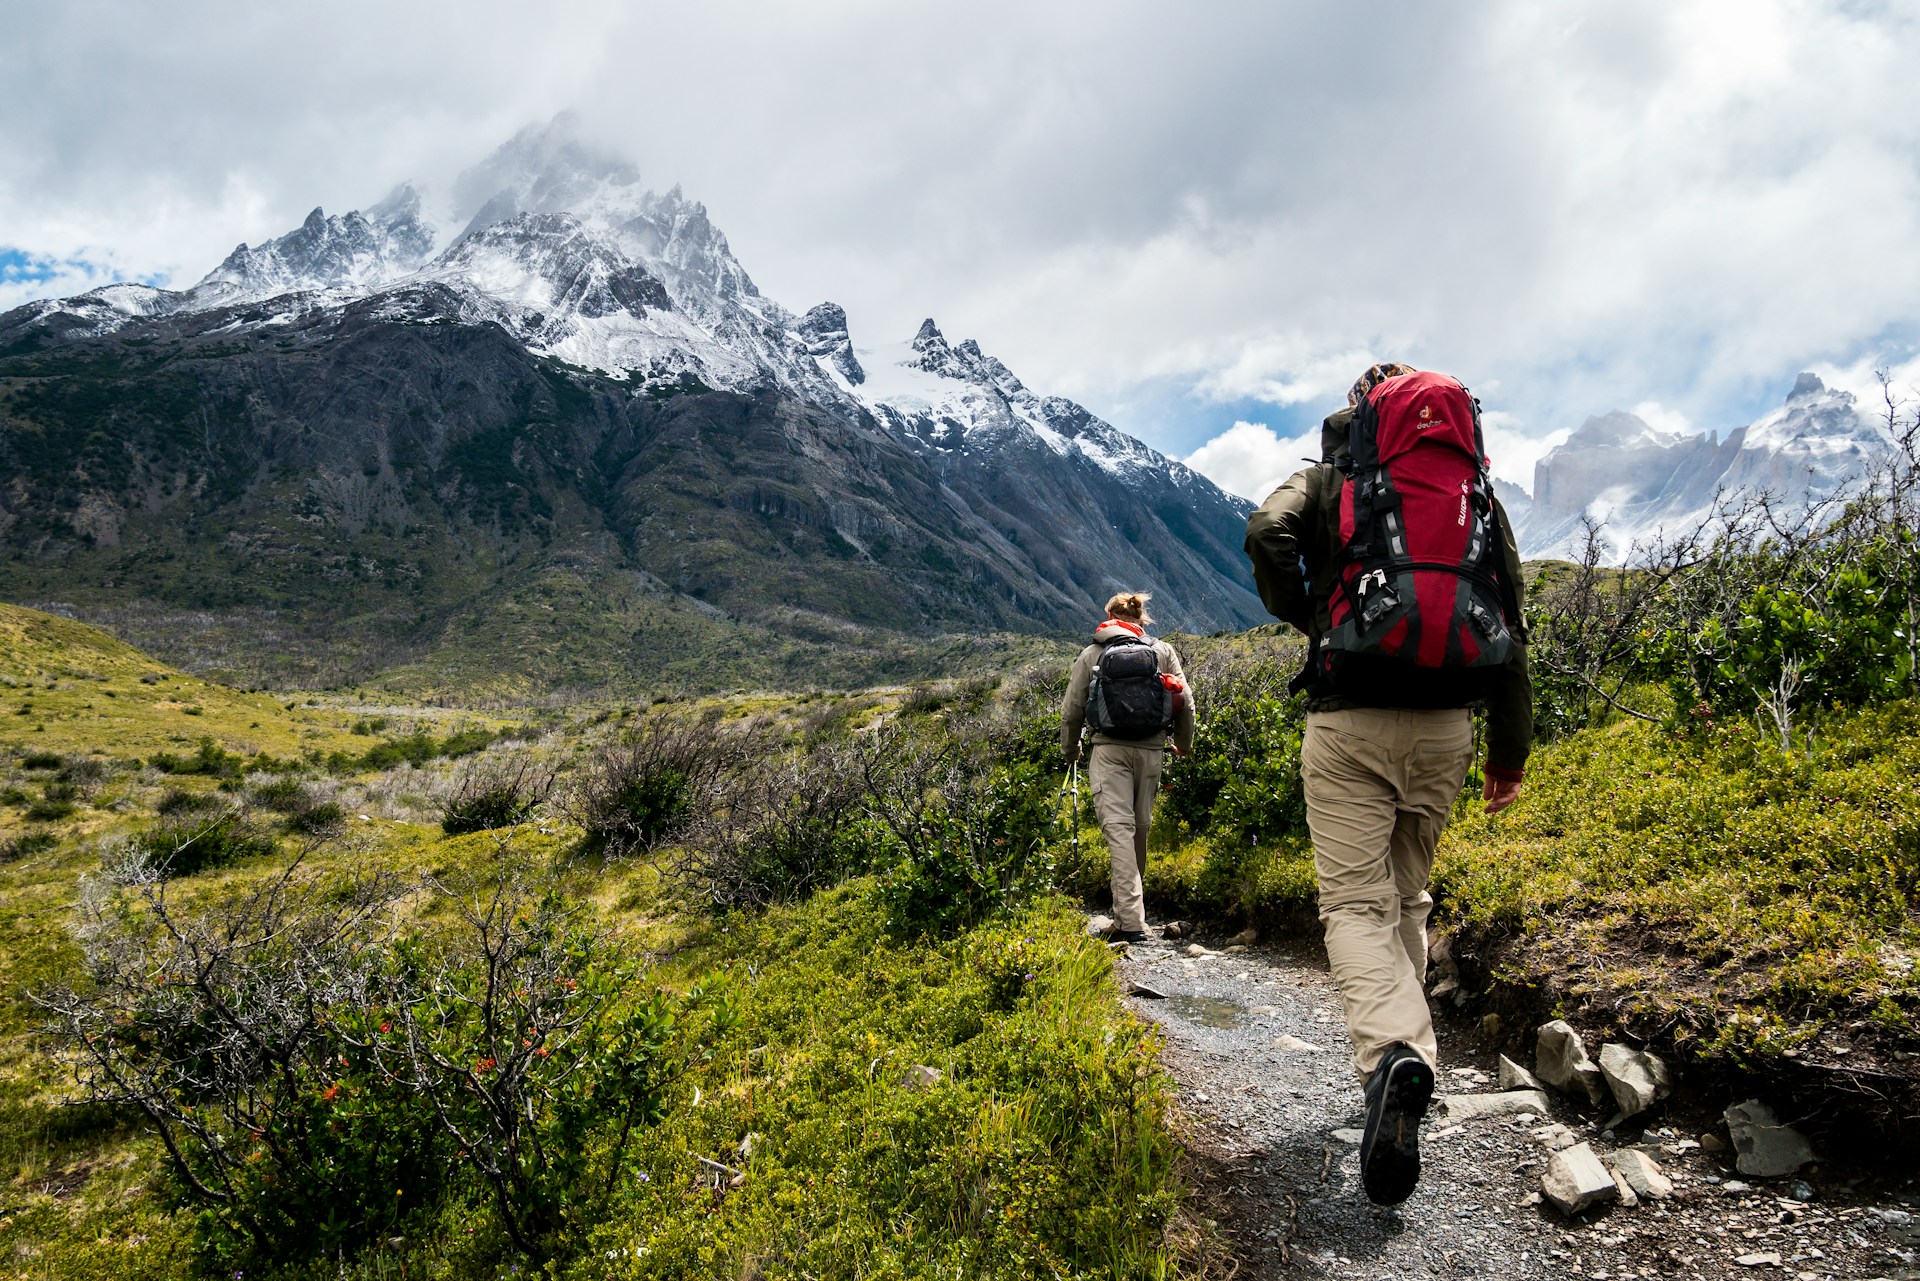 Off-grid: Hiking Patagonia’s Remote Trails